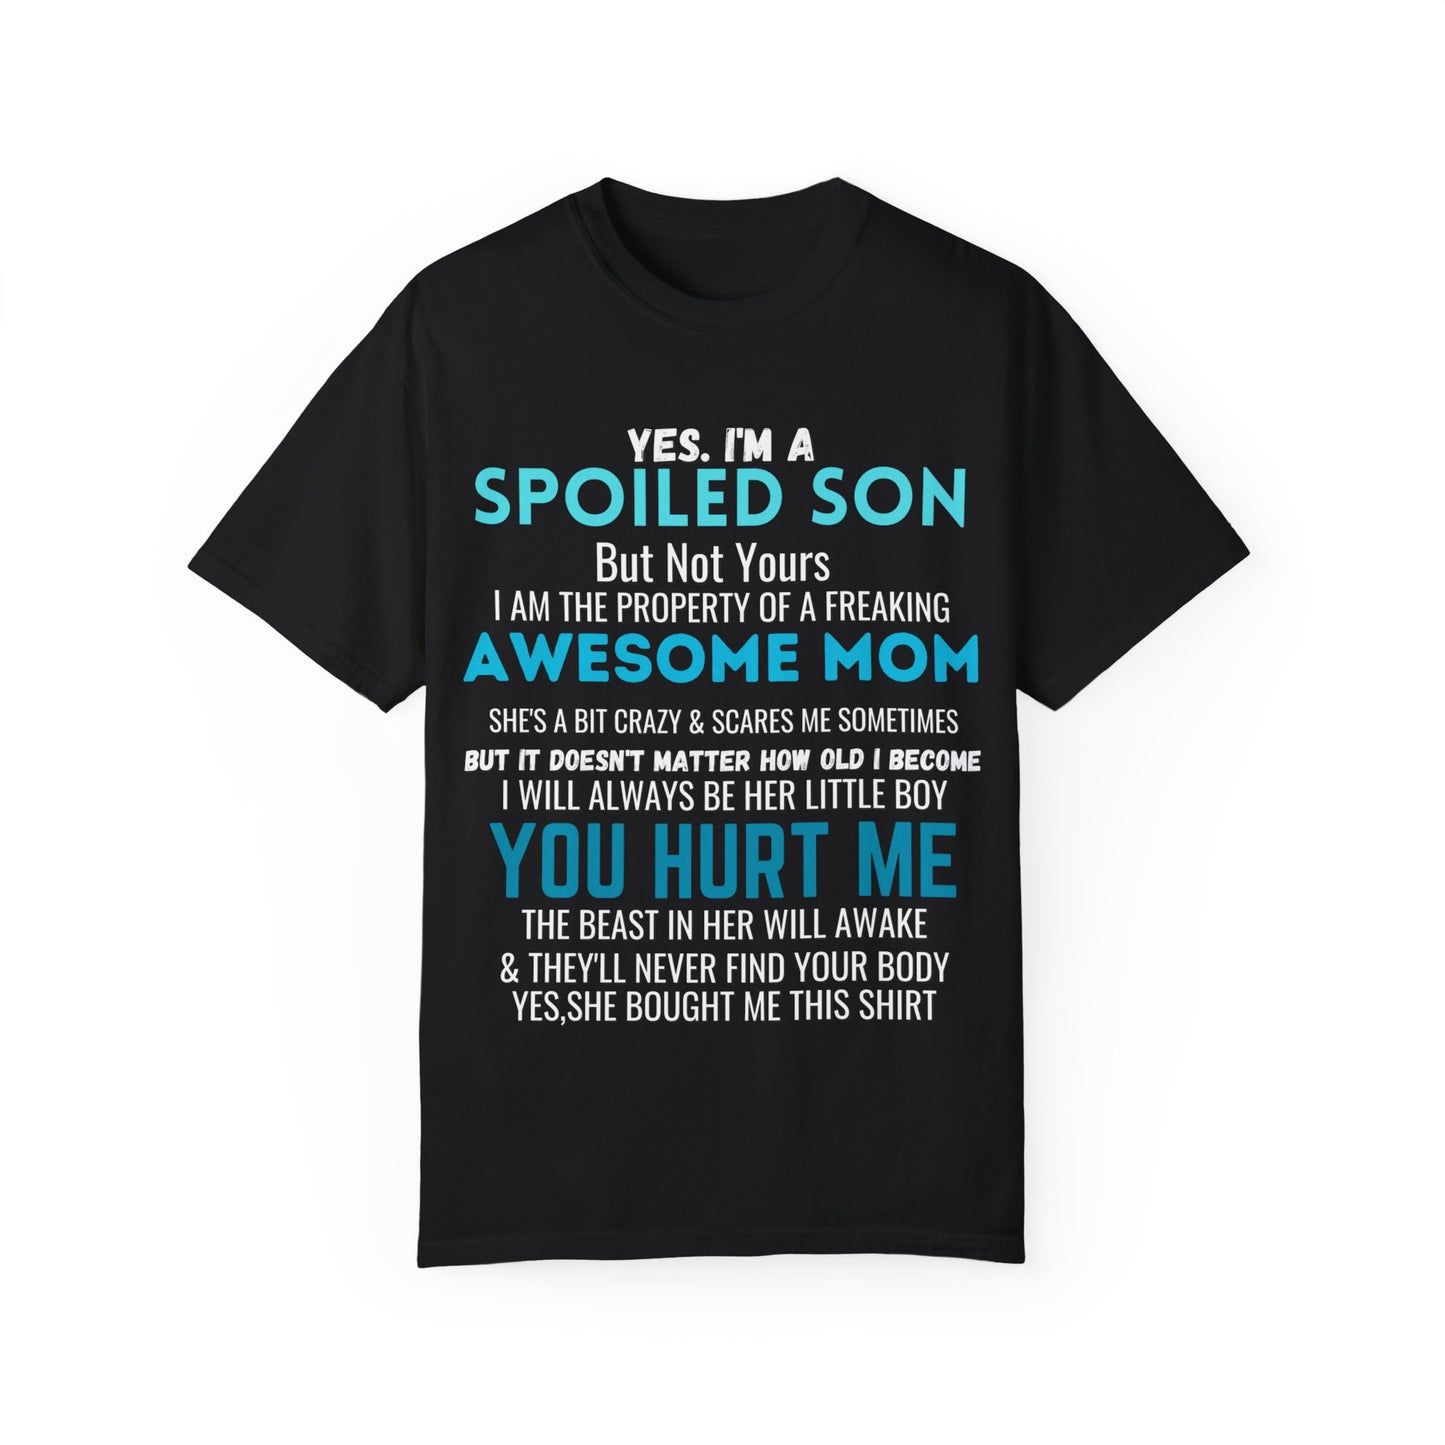 To My Son | Unisex Garment-Dyed T-shirt